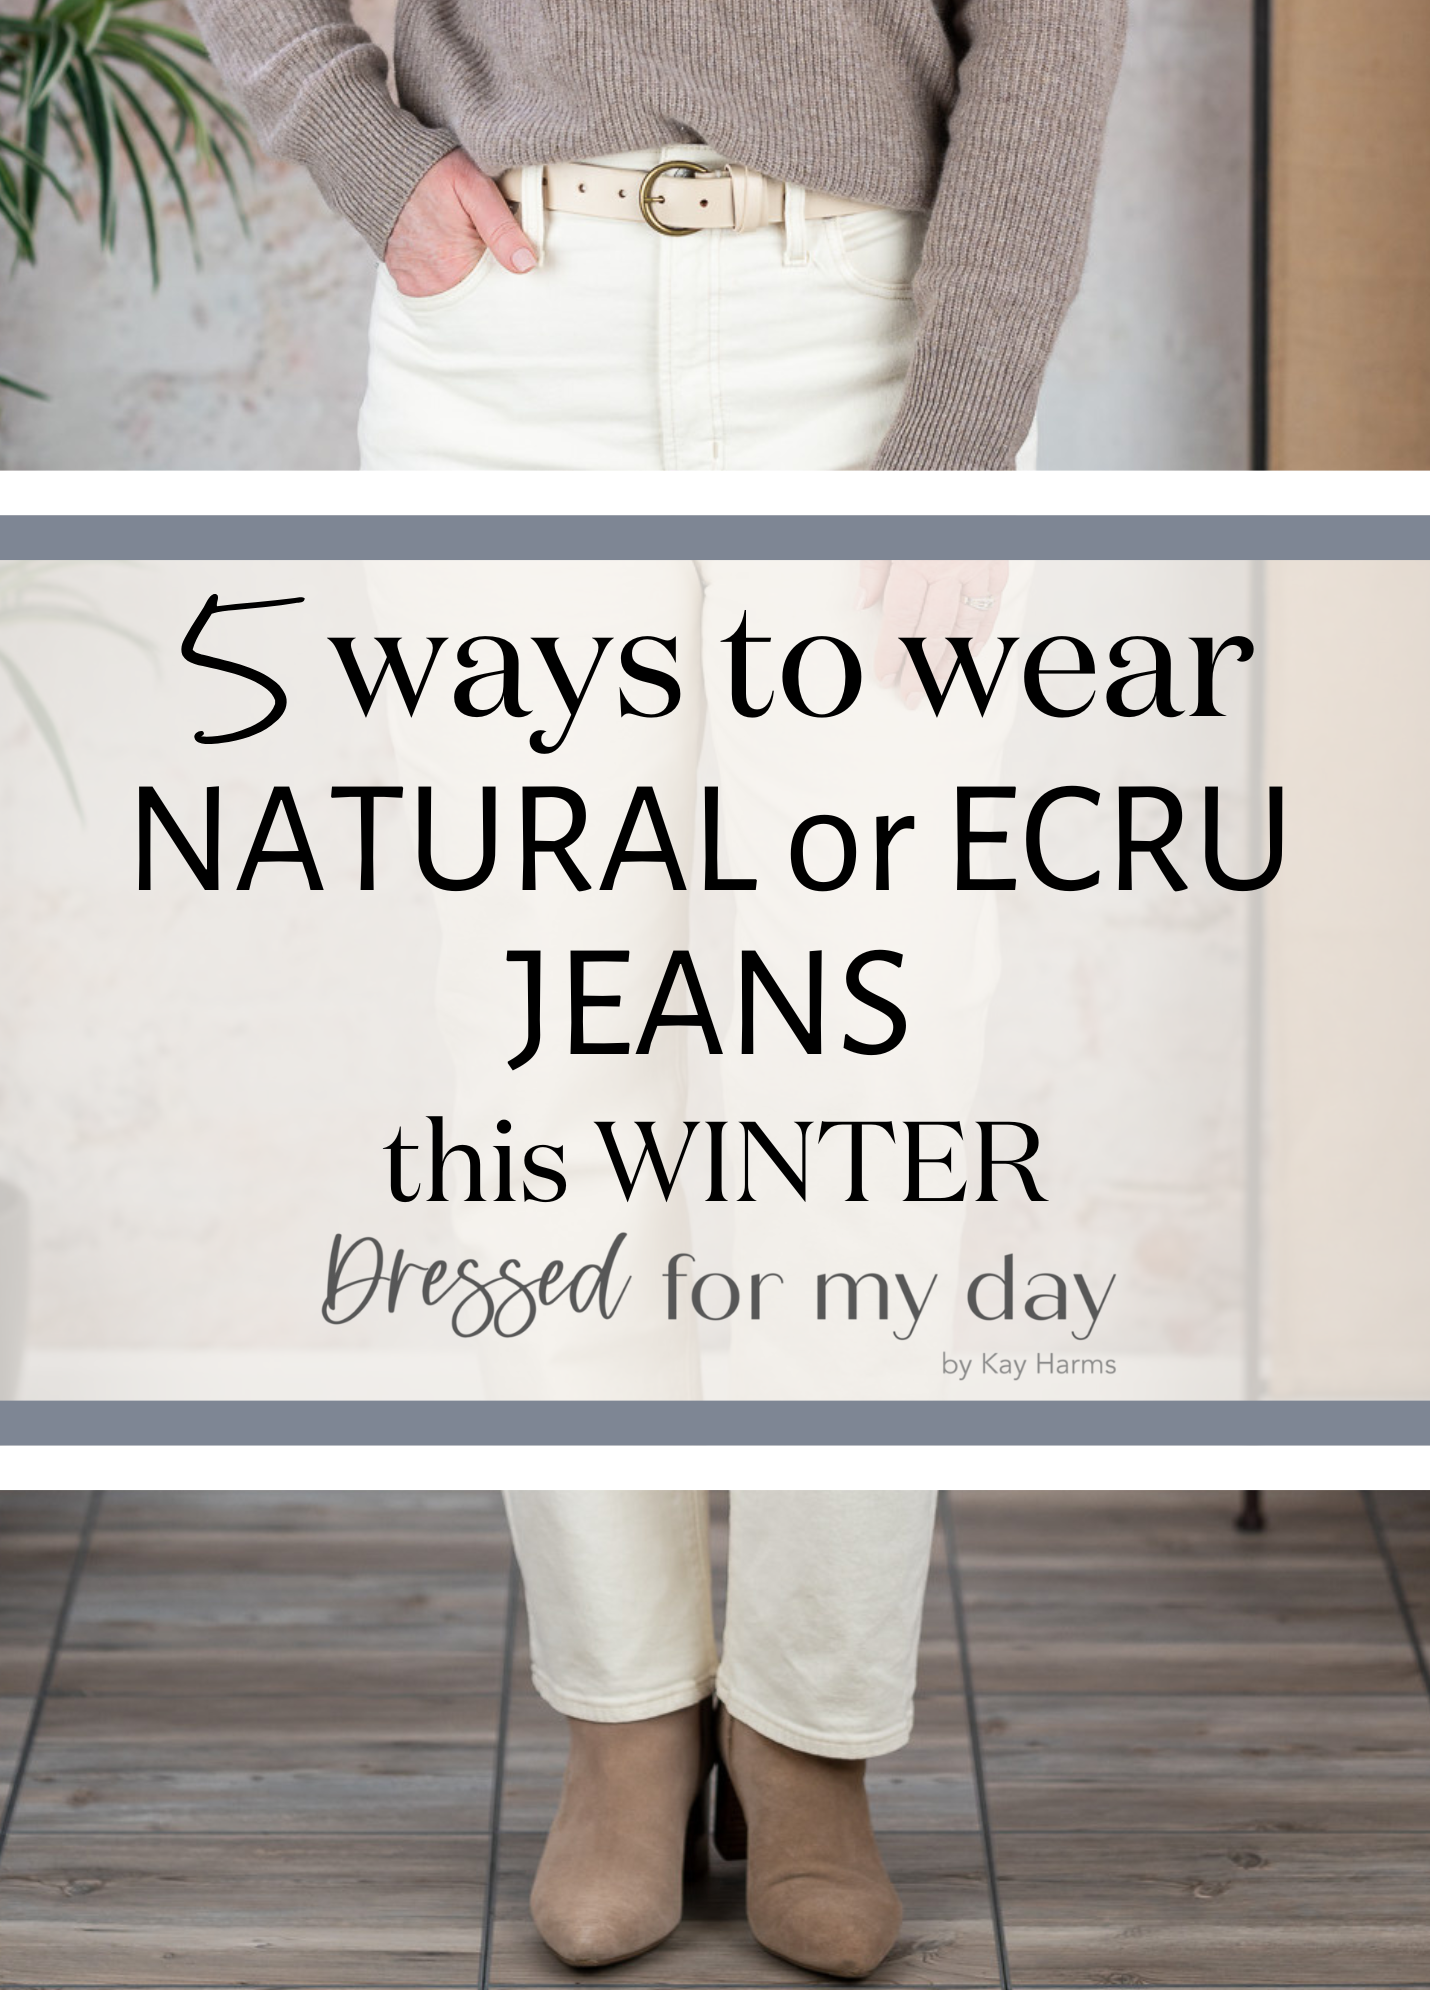 5 Ways to Wear Natural or Ecru Jeans this Winter